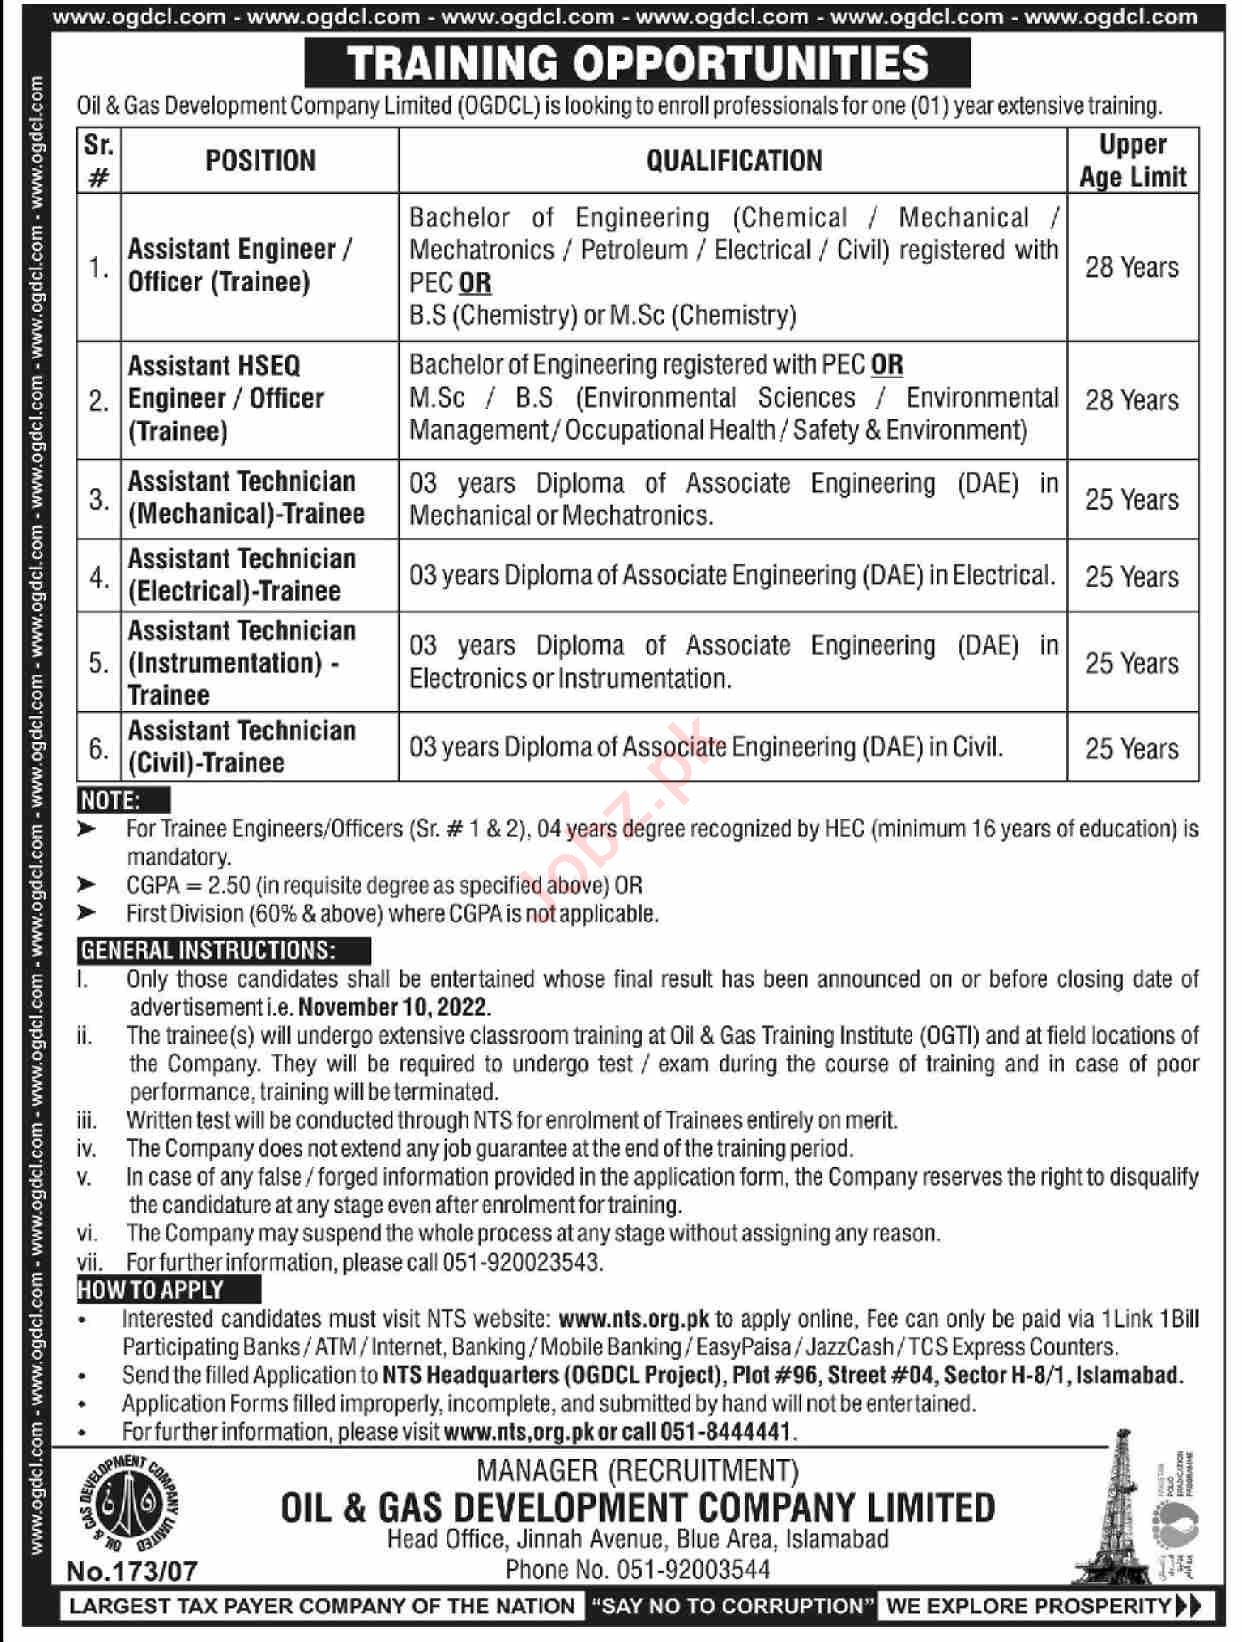 Latest Oil & Gas Development Company Limited OGDCL Management Posts Islamabad 2022